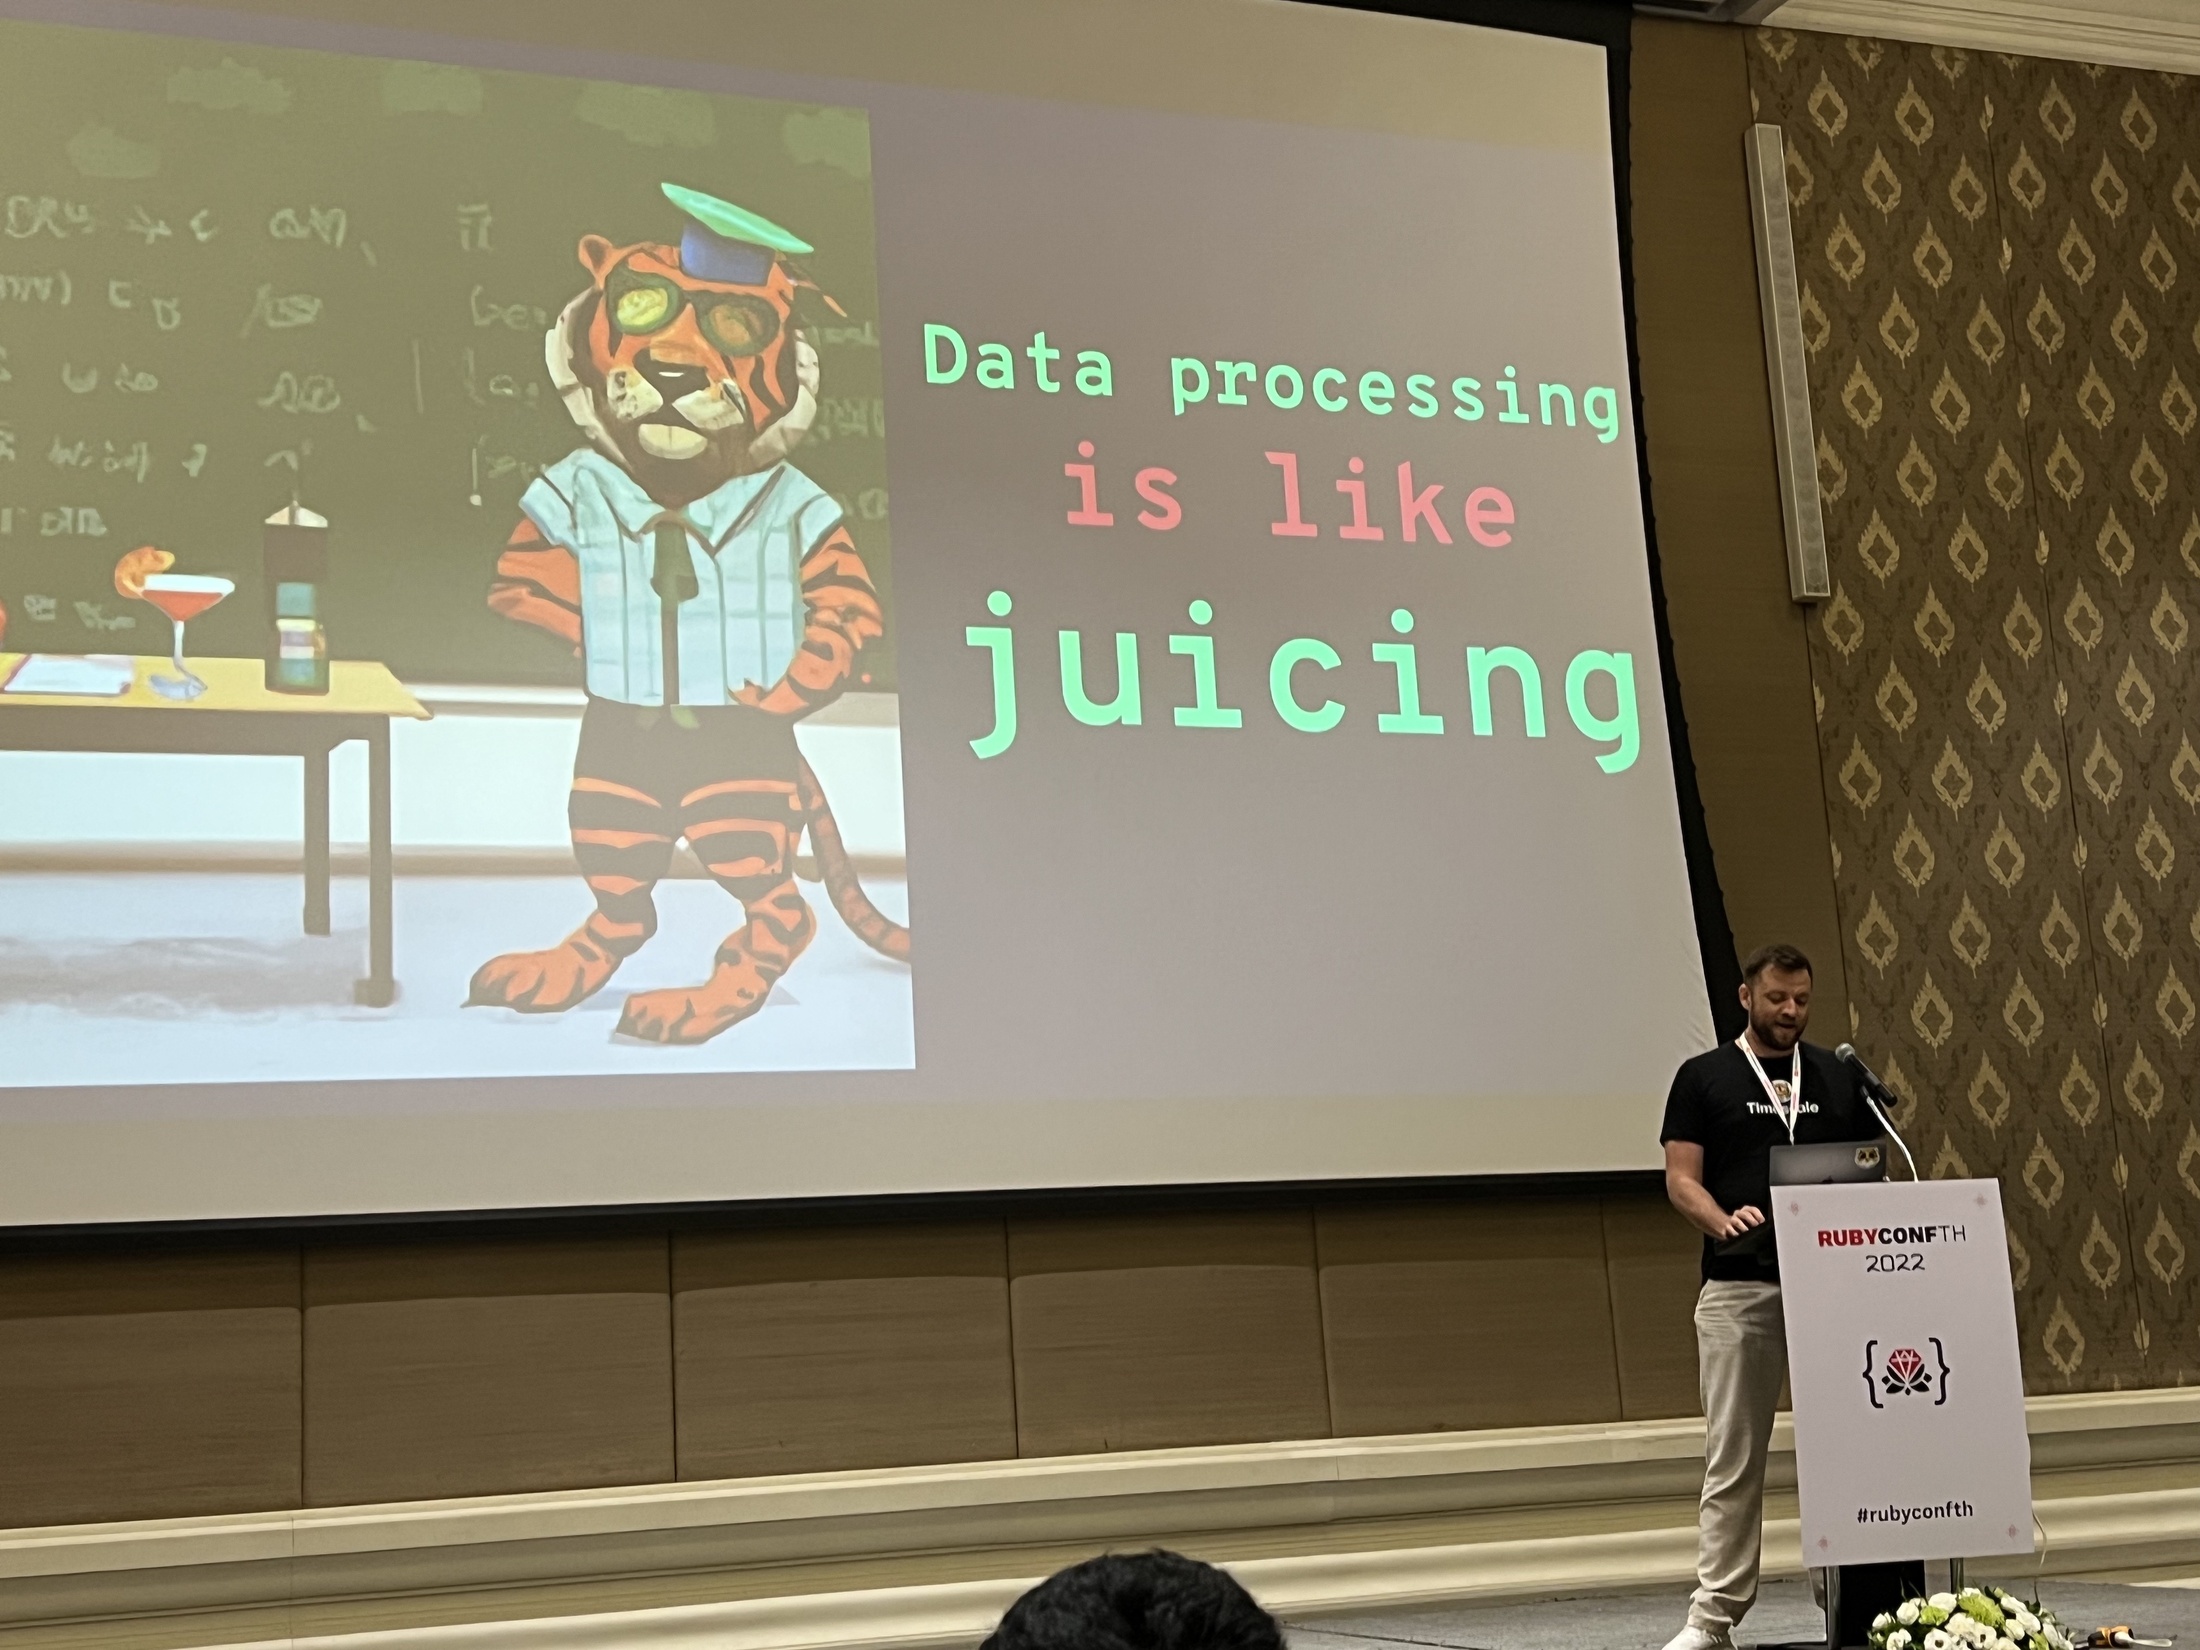 2 data processing is like juicing